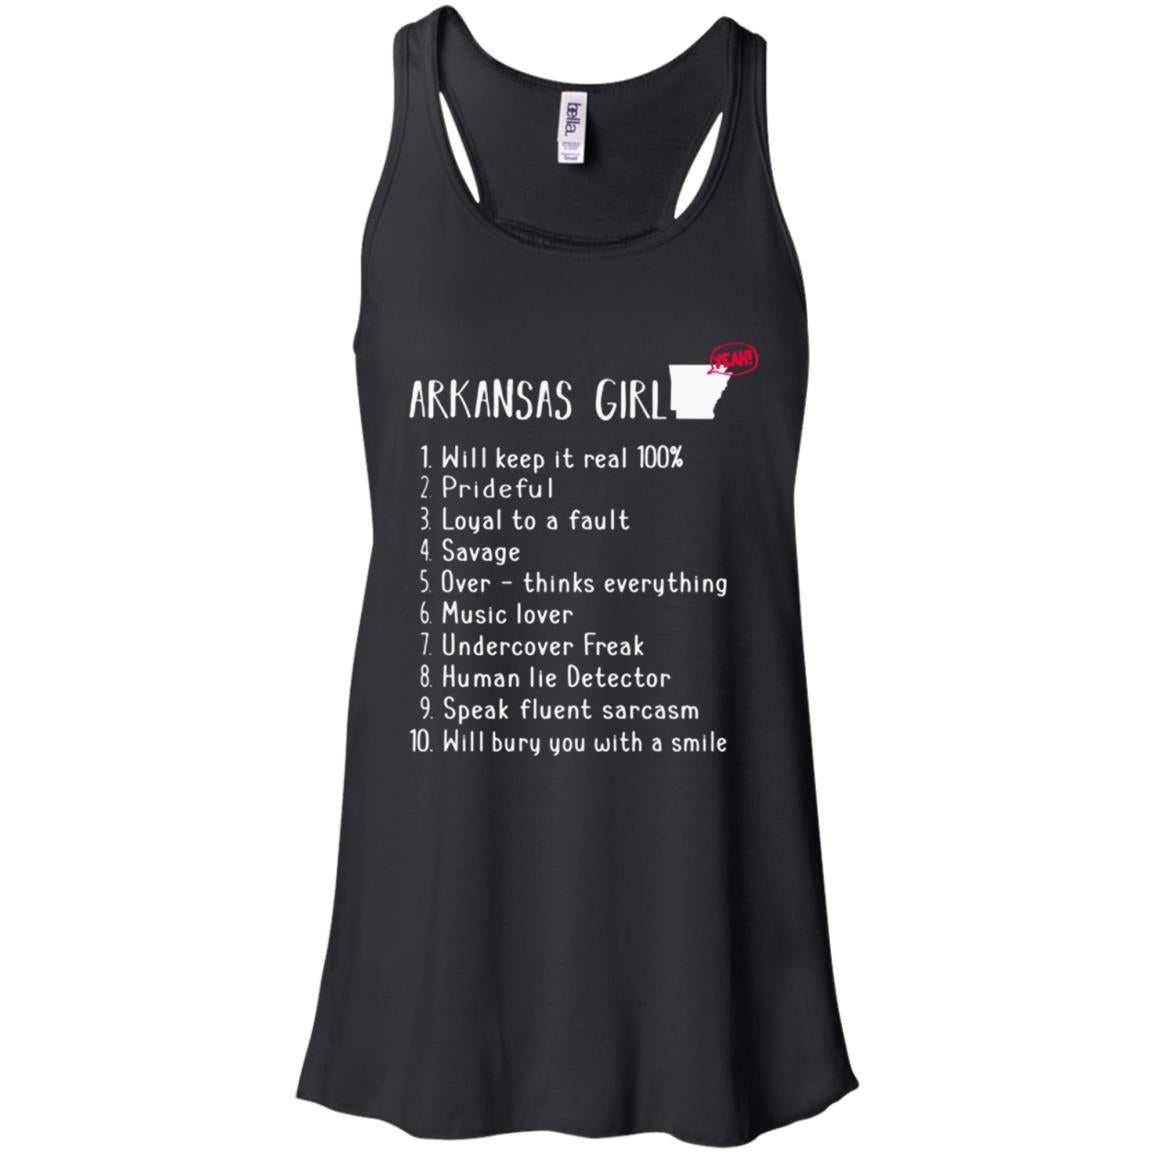 Arkansas Girl Will Keep It Real What She Can Do Racerback Tank Shirts